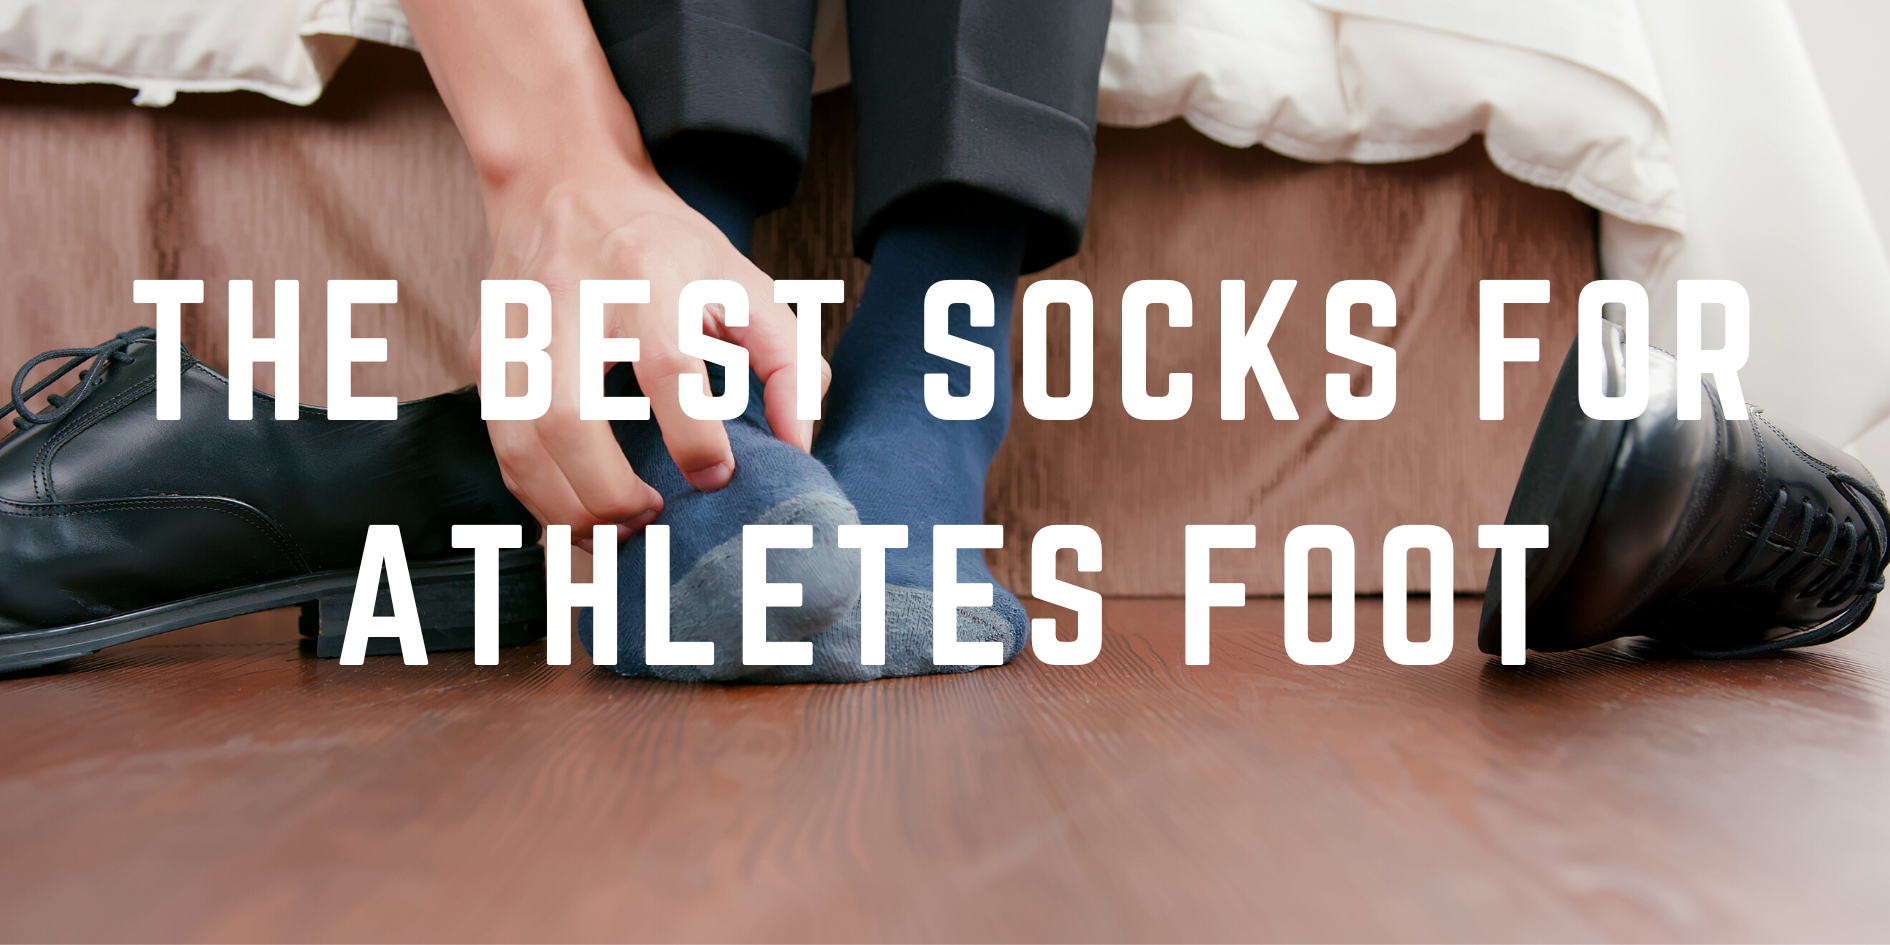 the 5 best socks for athletes foot